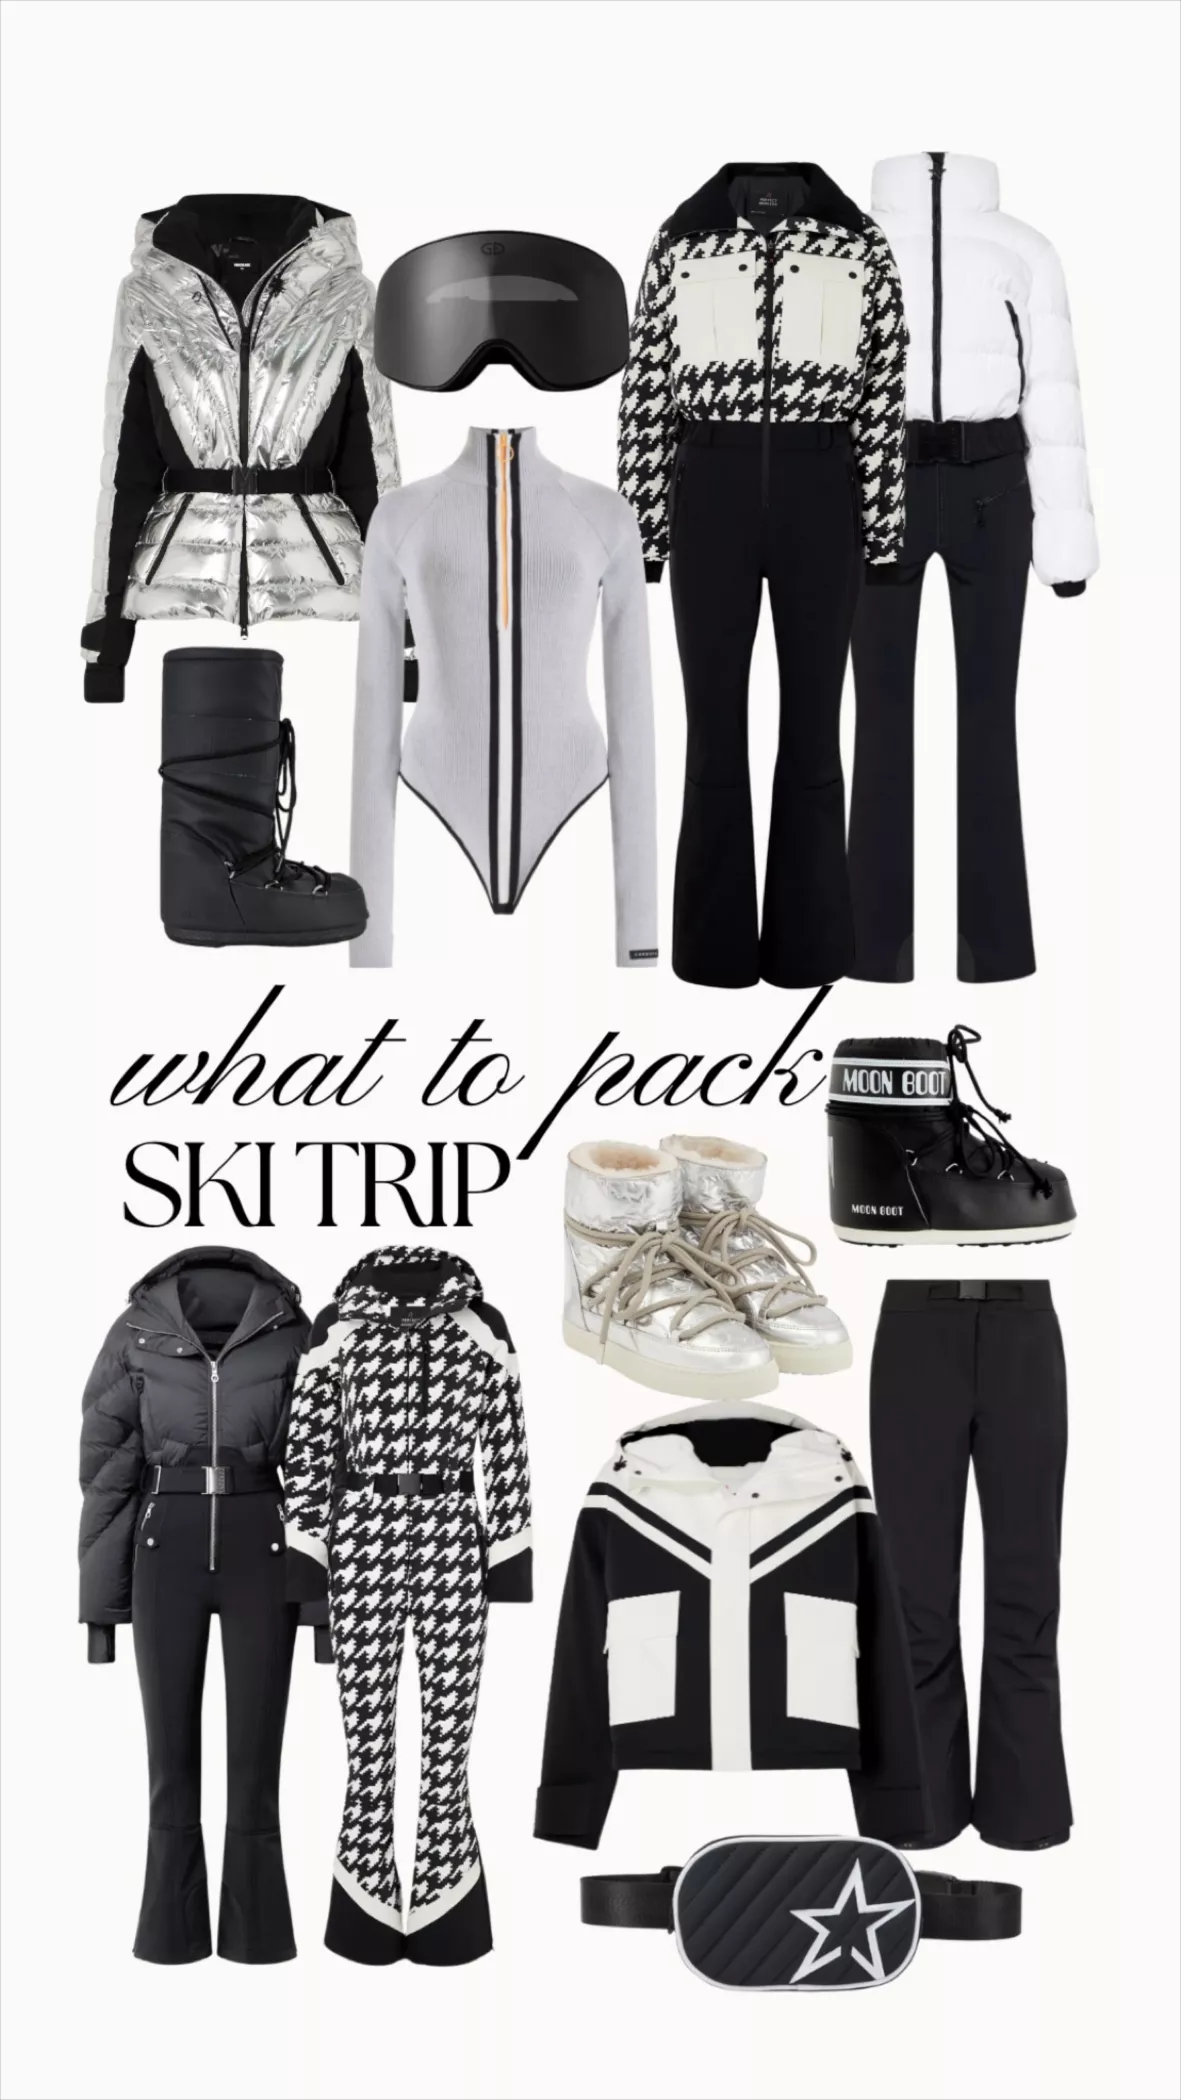 Skit Trip Outfit Ideas